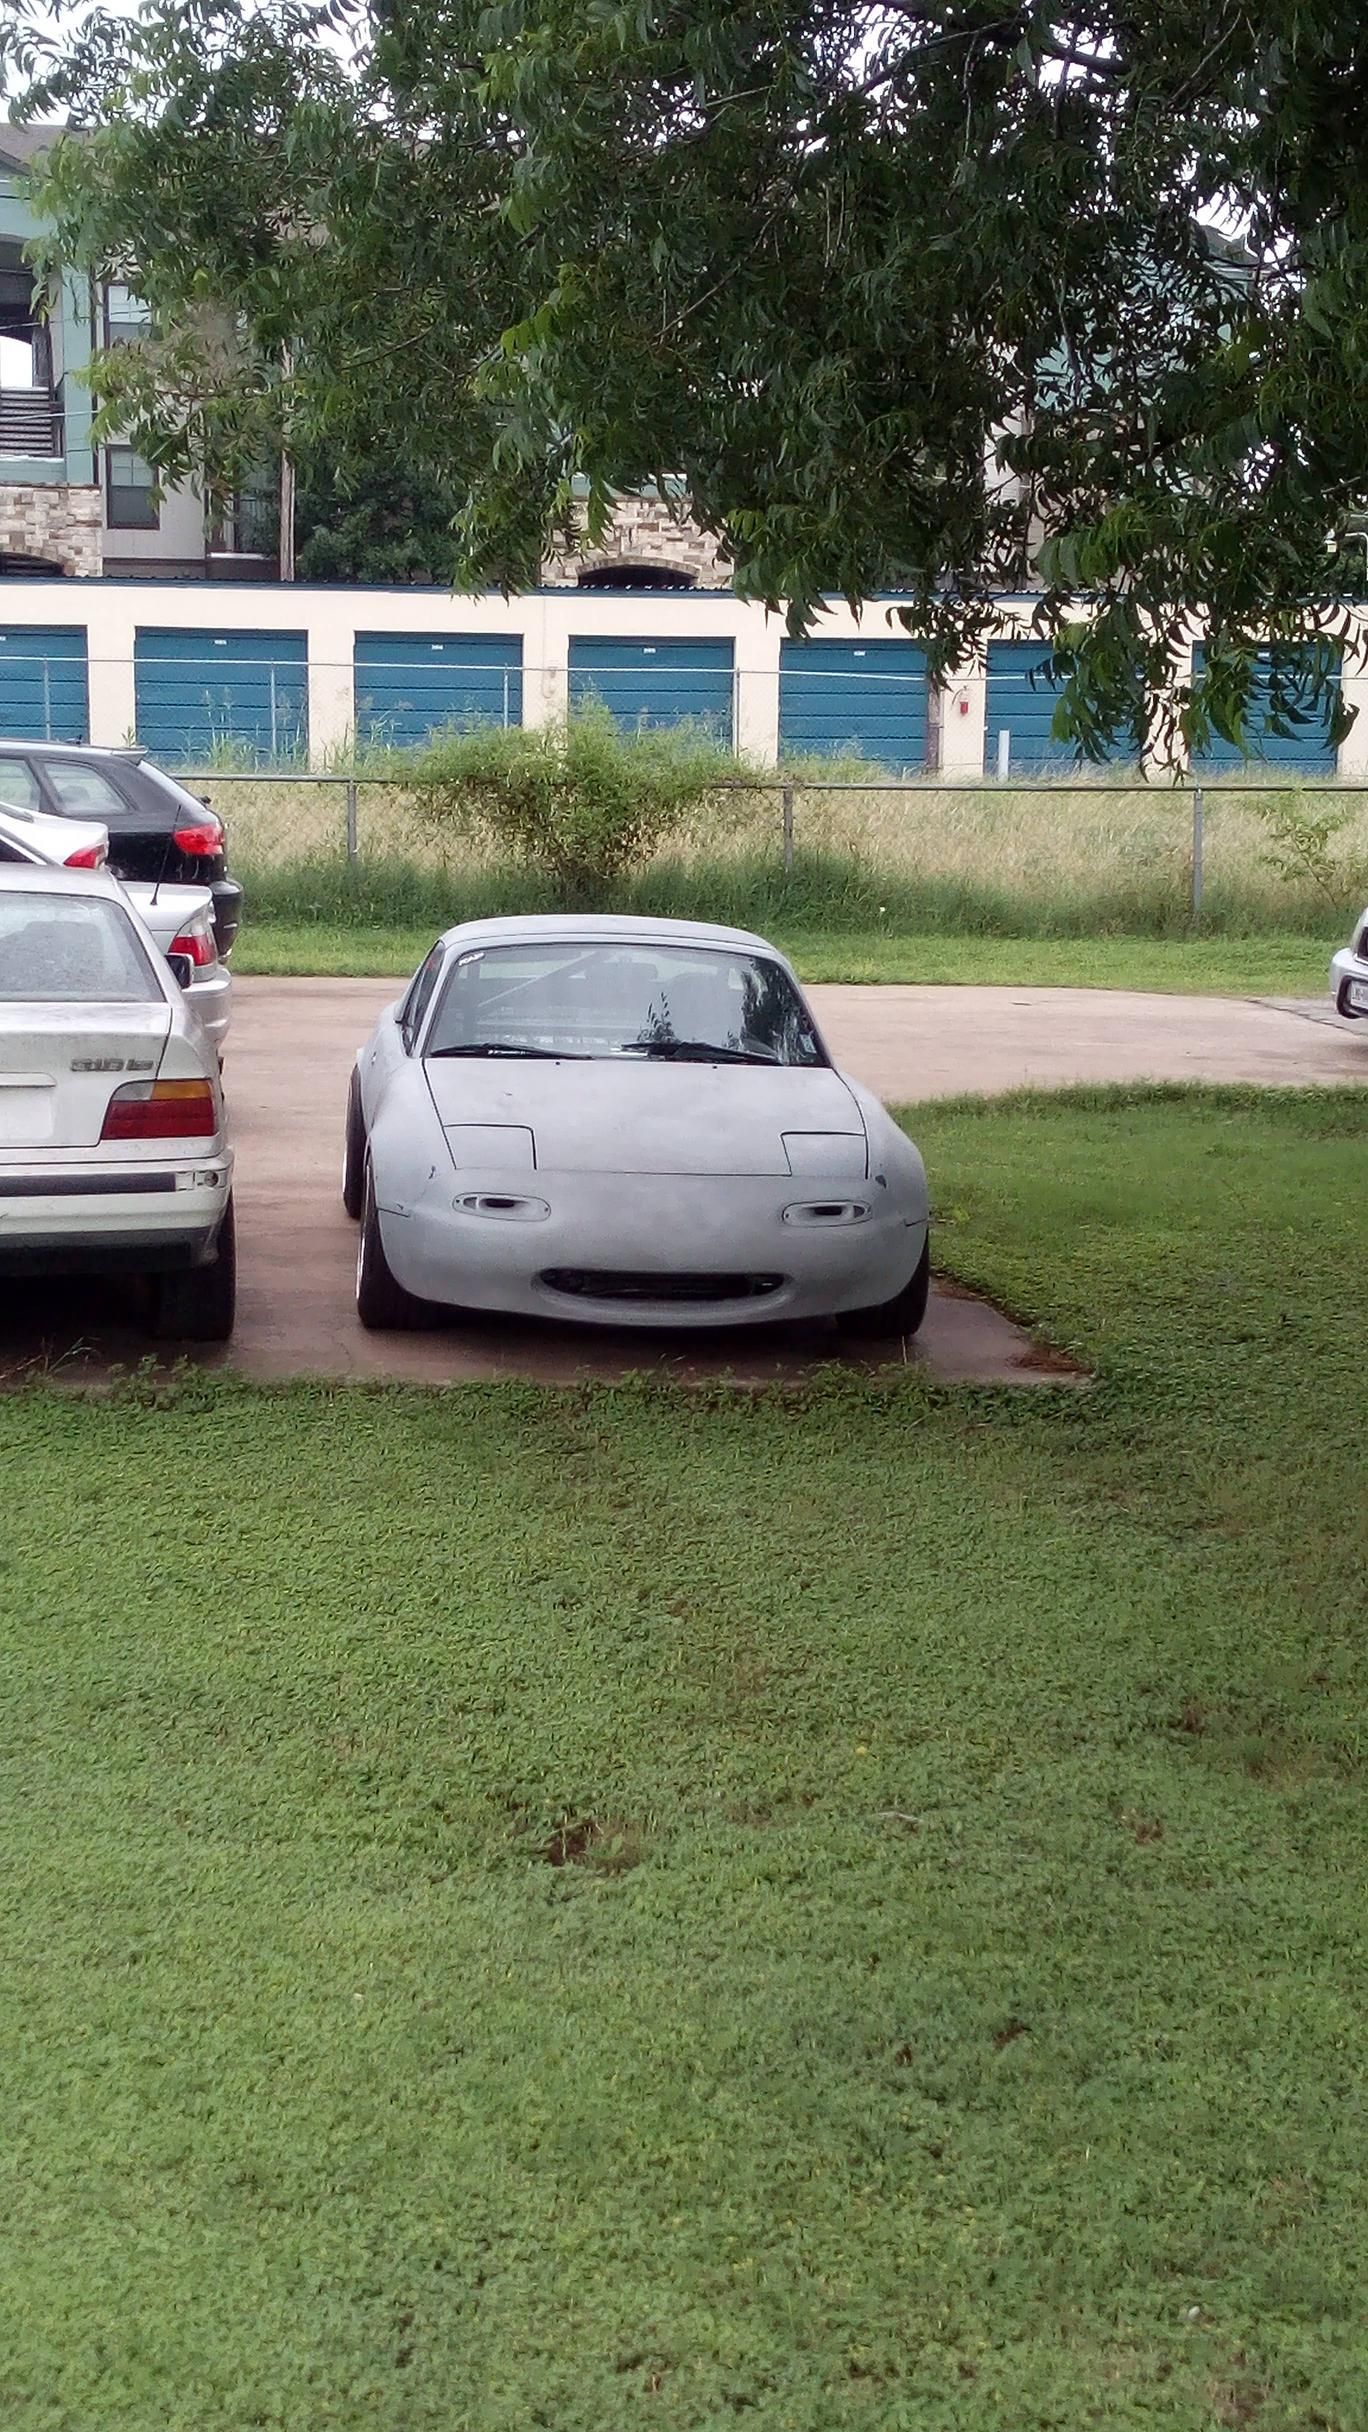 This stoned car I saw at work today.